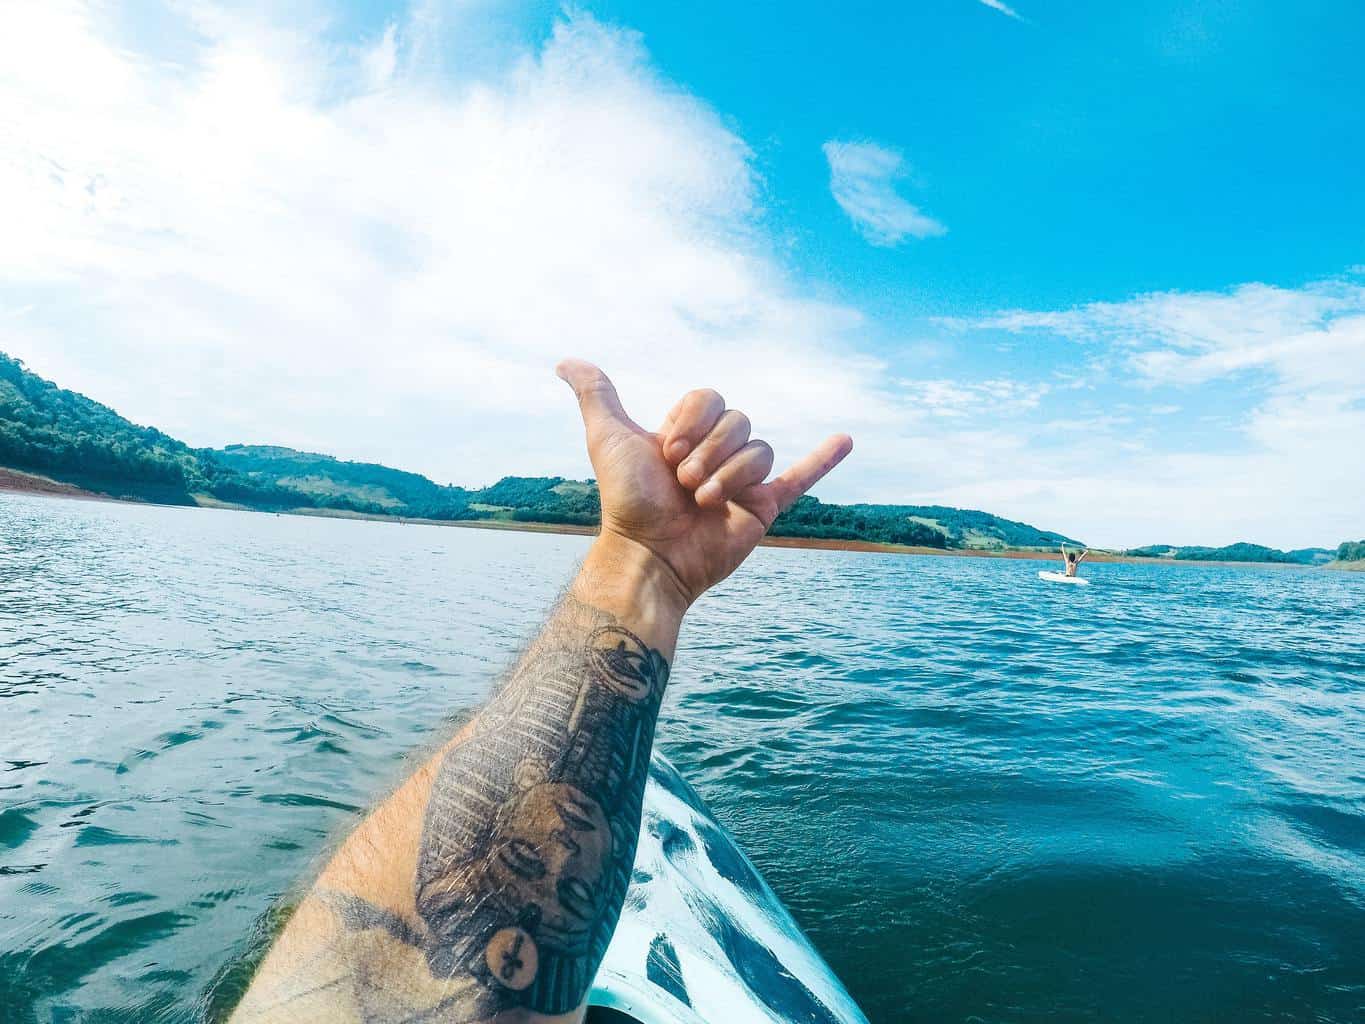 Can I Go Kayaking With a New Tattoo? (Facts You Should Know)